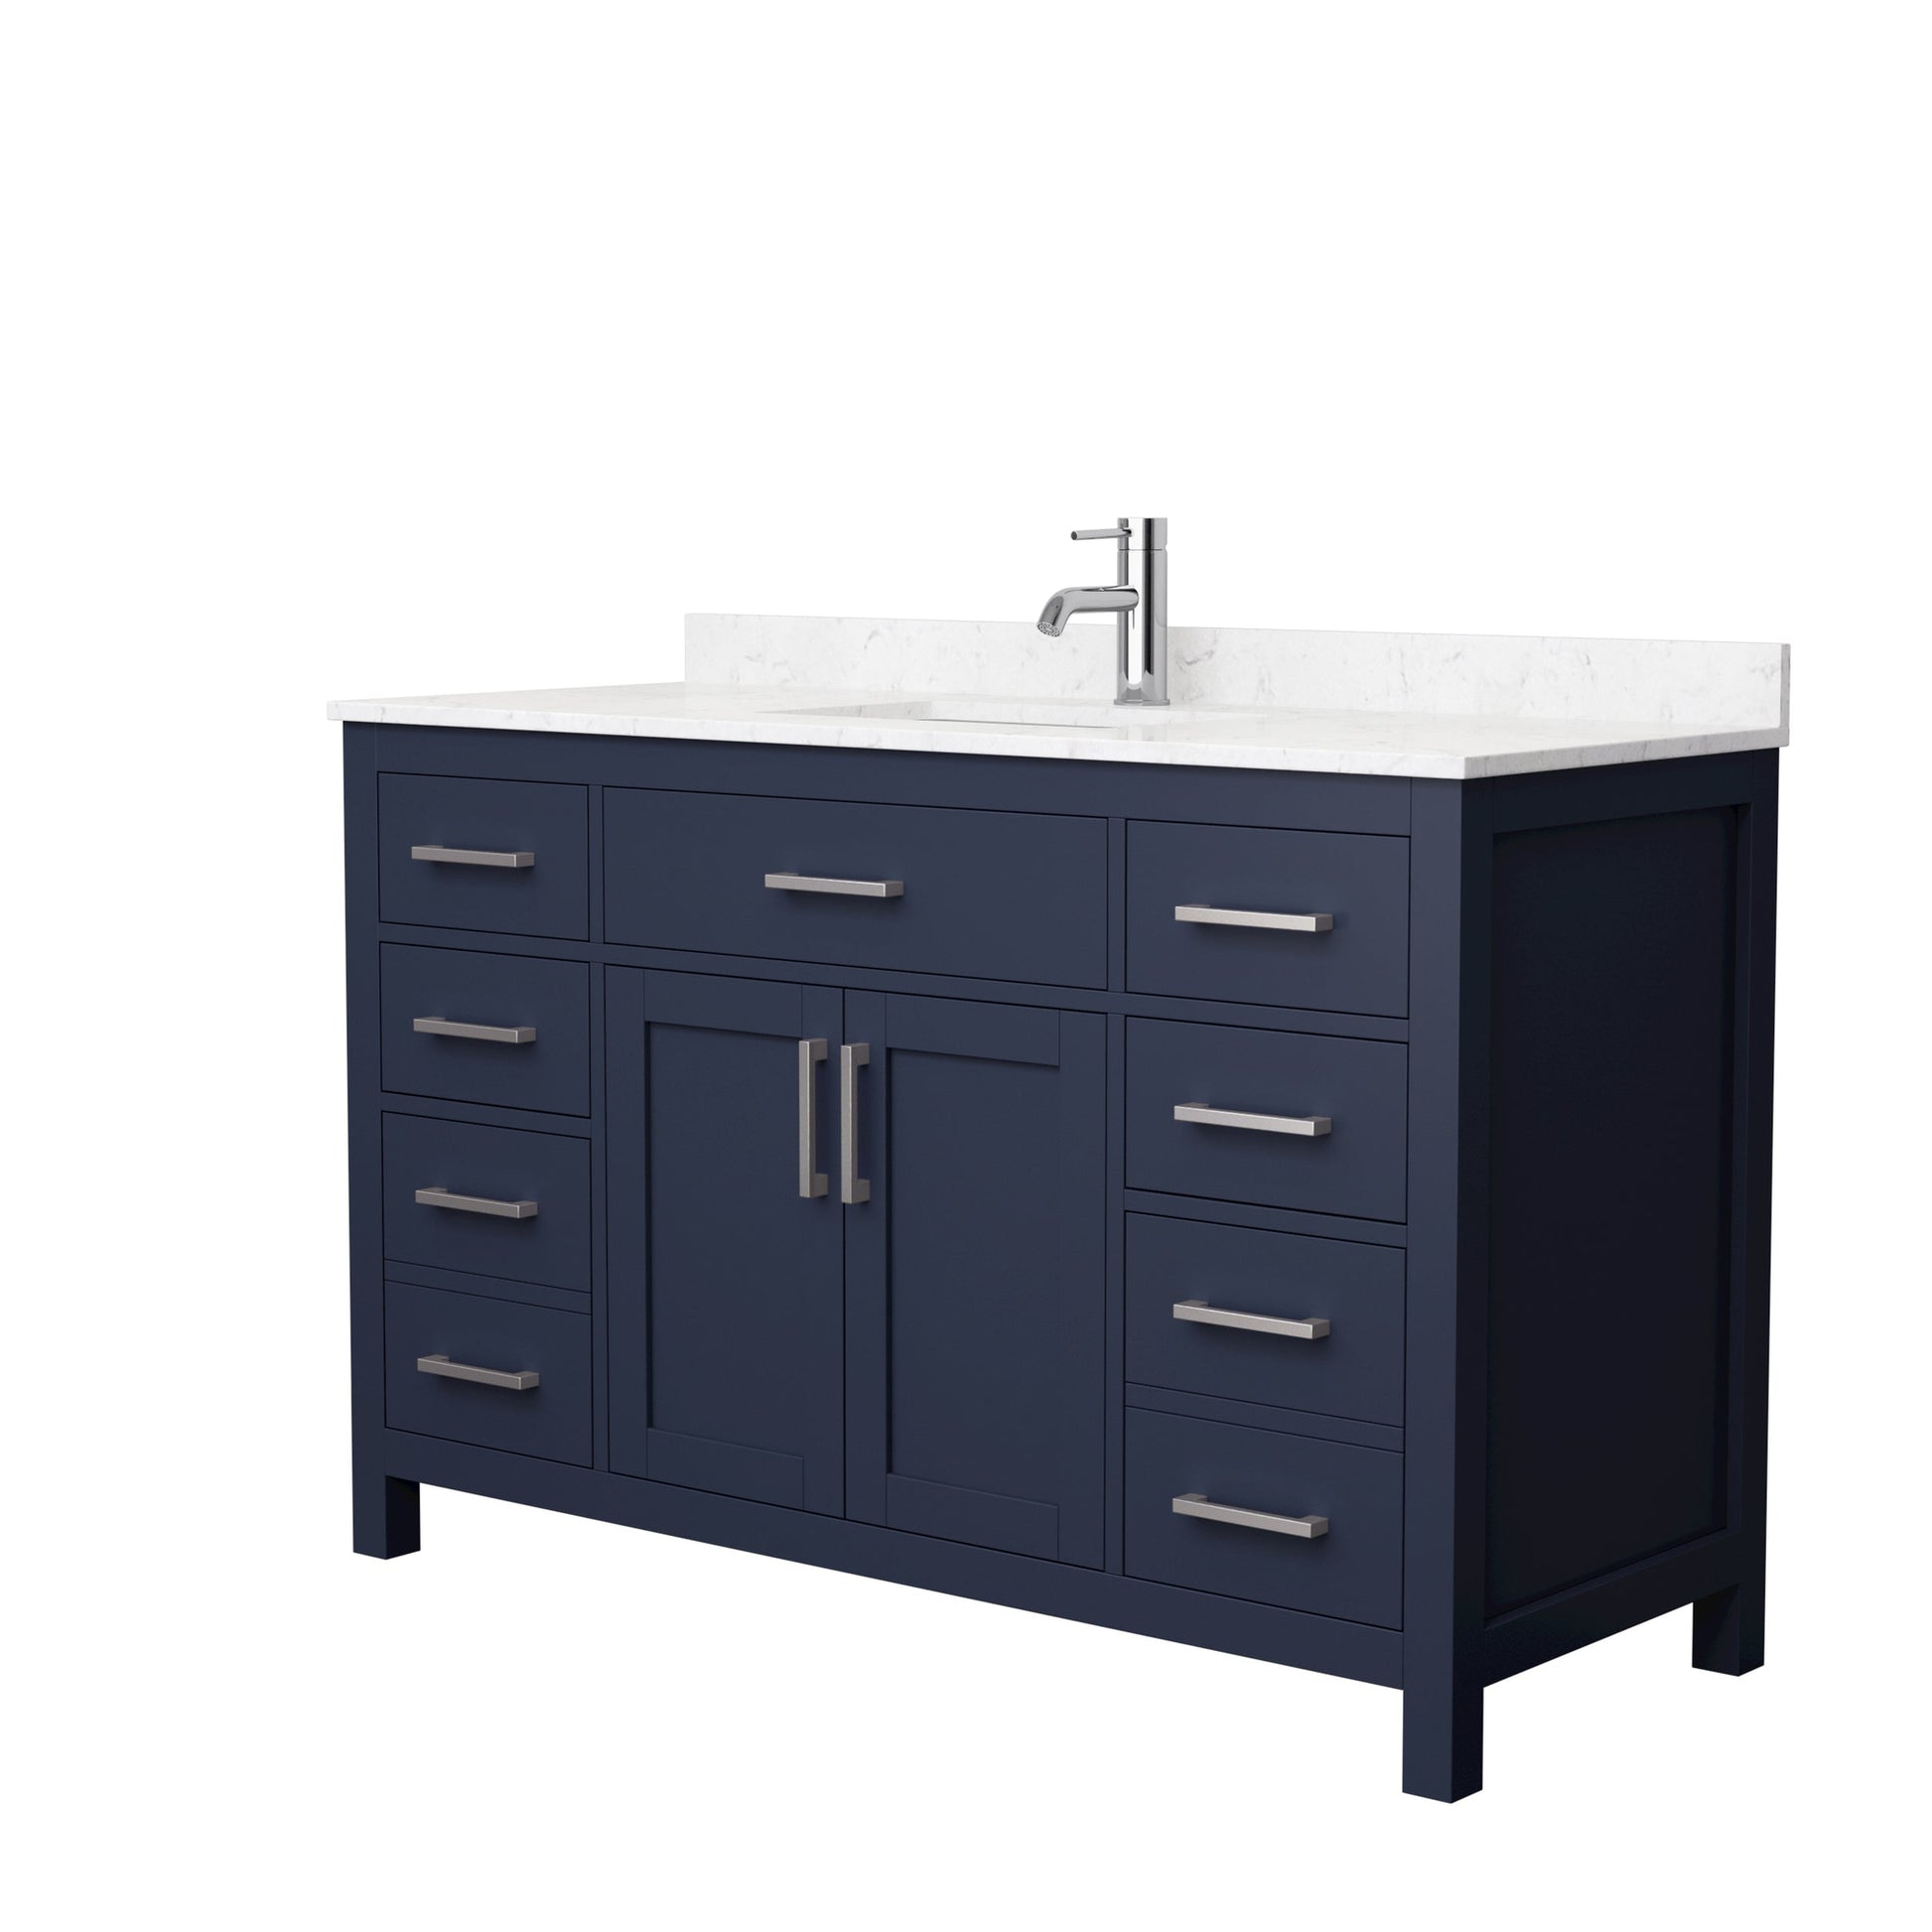 Wyndham Collection Beckett 54" Single Bathroom Dark Blue Vanity With White Carrara Cultured Marble Countertop, Undermount Square Sink And Brushed Nickel Trim